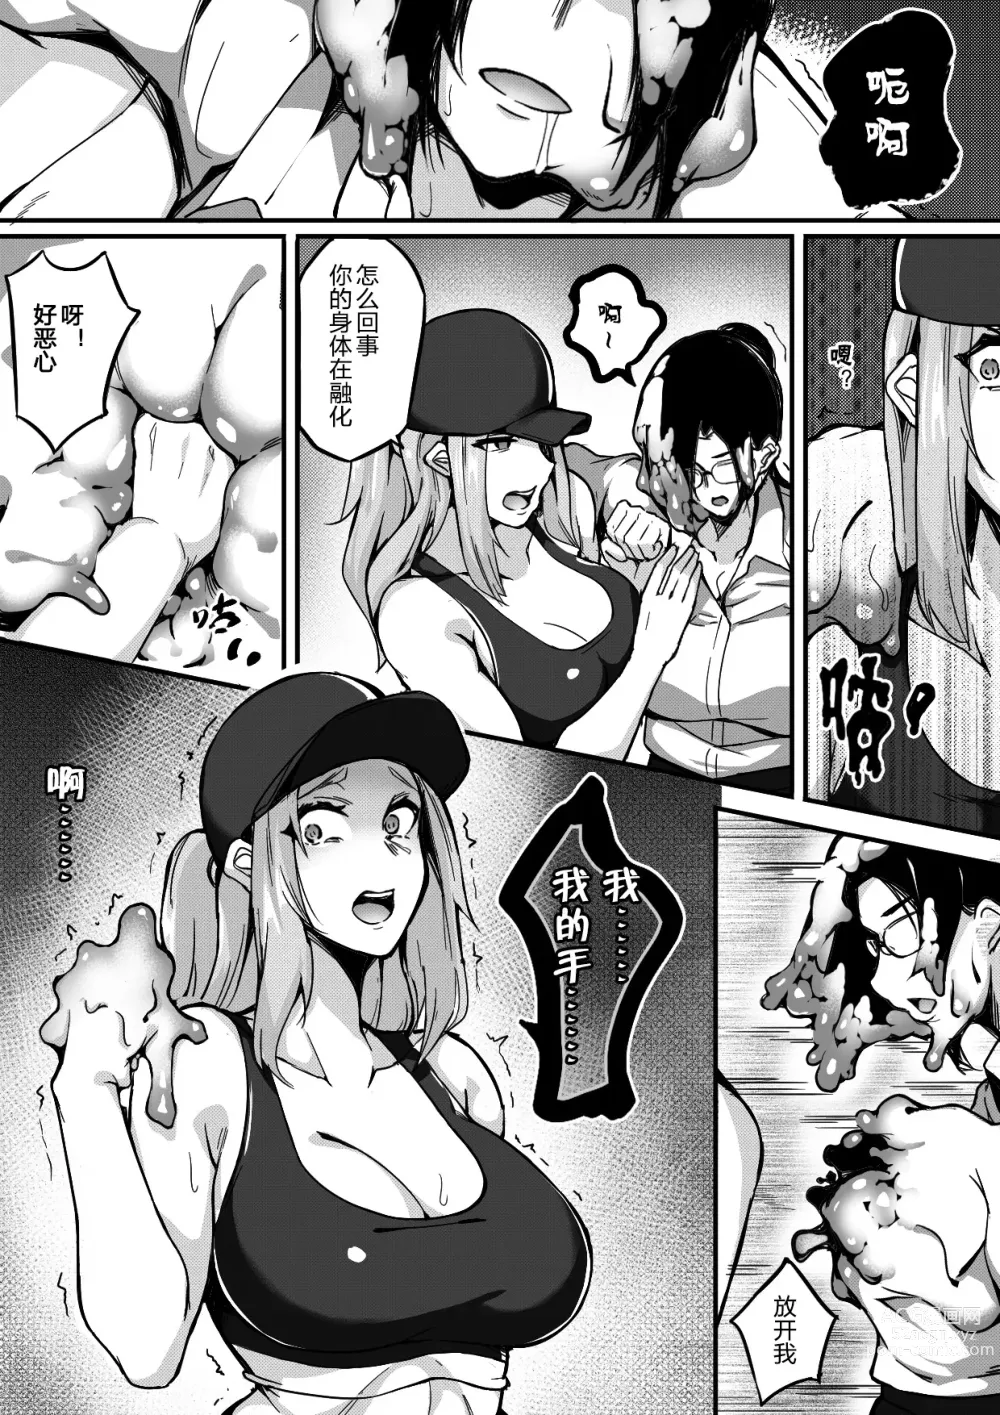 Page 10 of doujinshi Live Meat 5